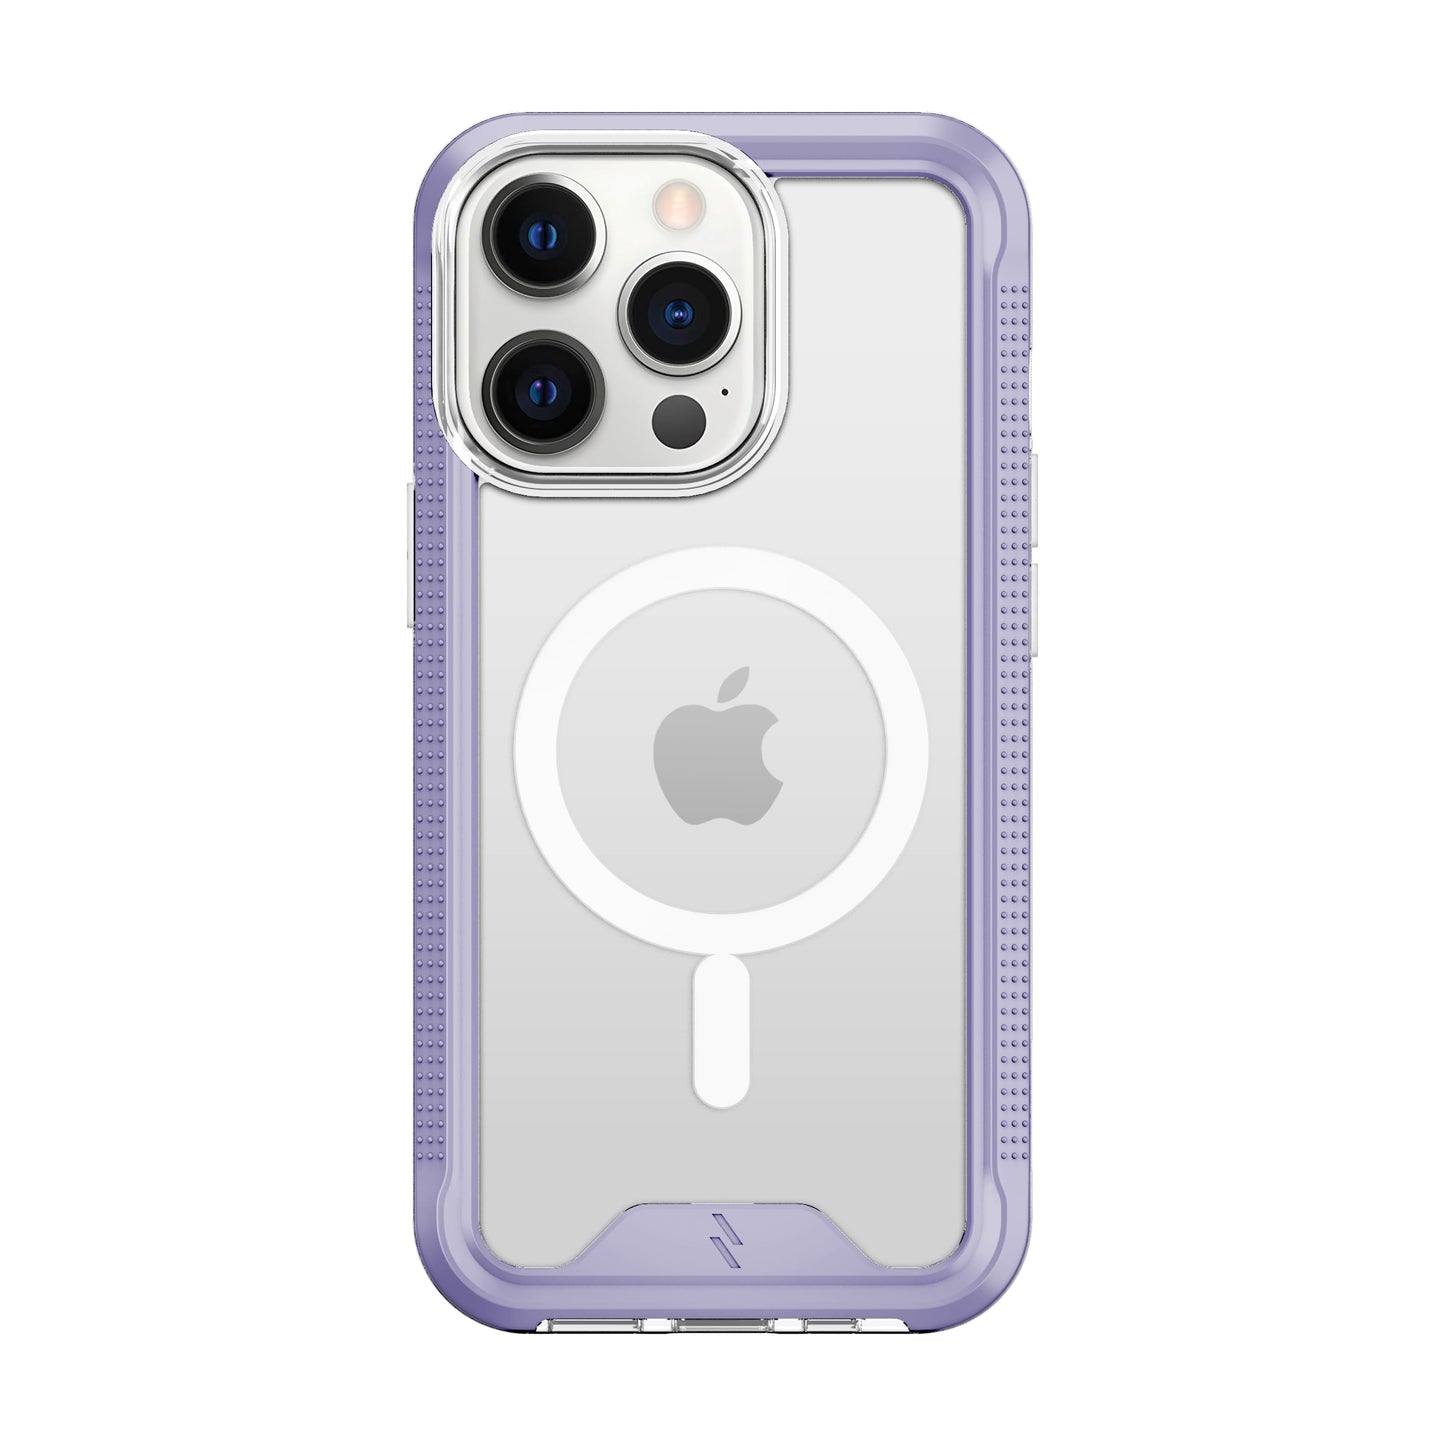 ZIZO ION Series with Magsafe iPhone 15 Pro Case - Purple